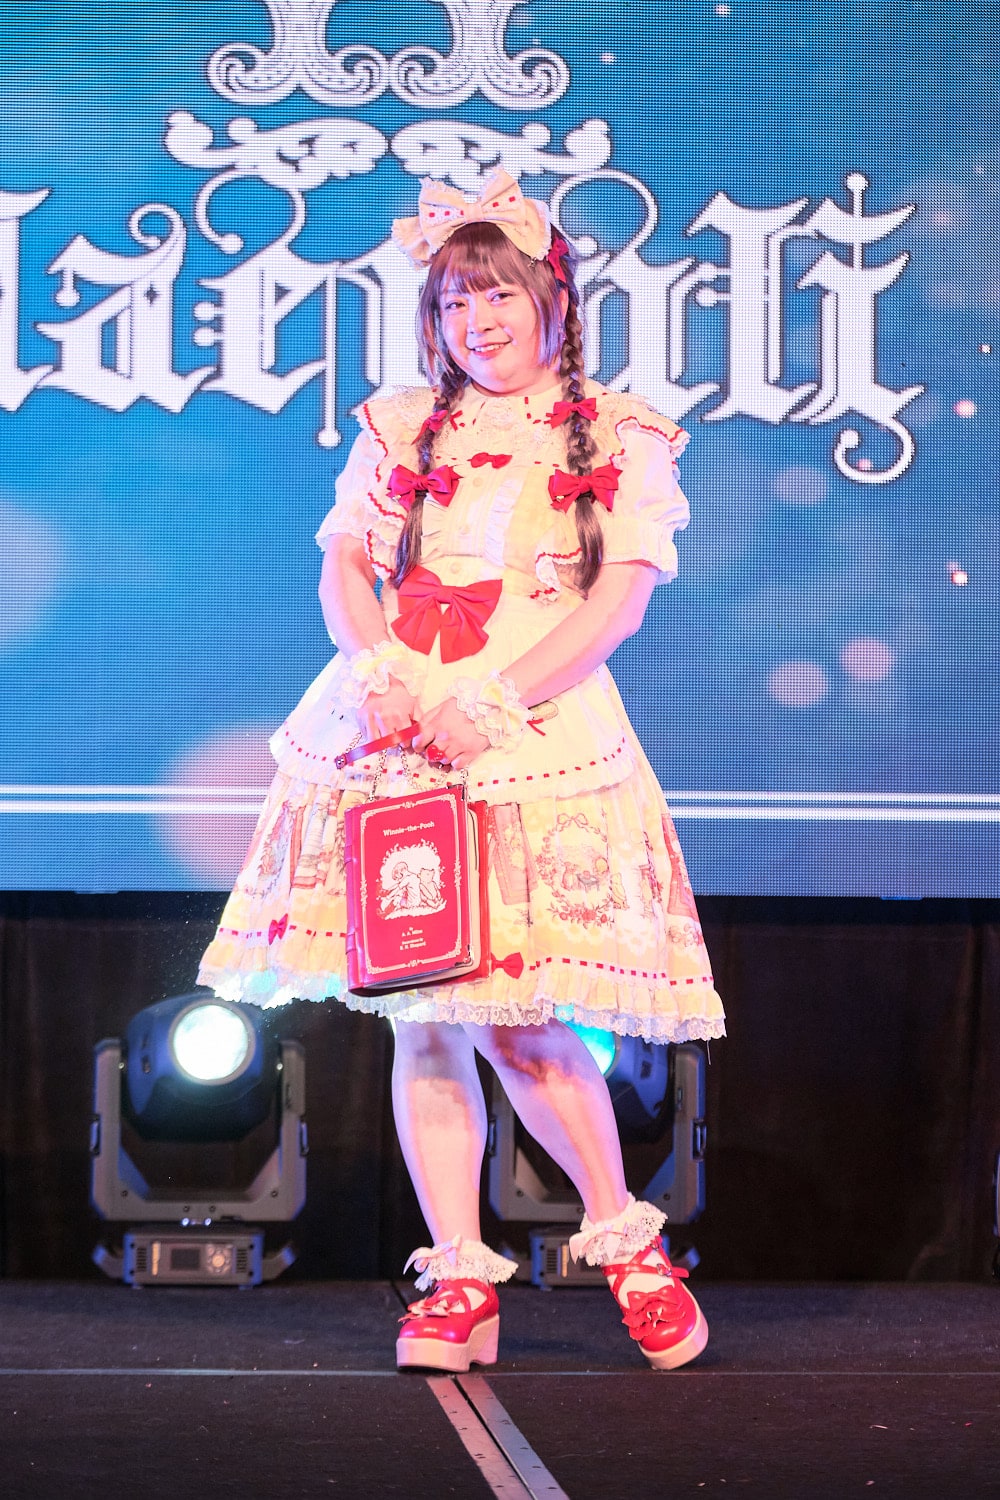 Model 3 wearing yellow and white gingham Winnie the Pooh print dress with matching headbow, half apron, and red accents holding book-shaped purse - full body 2.